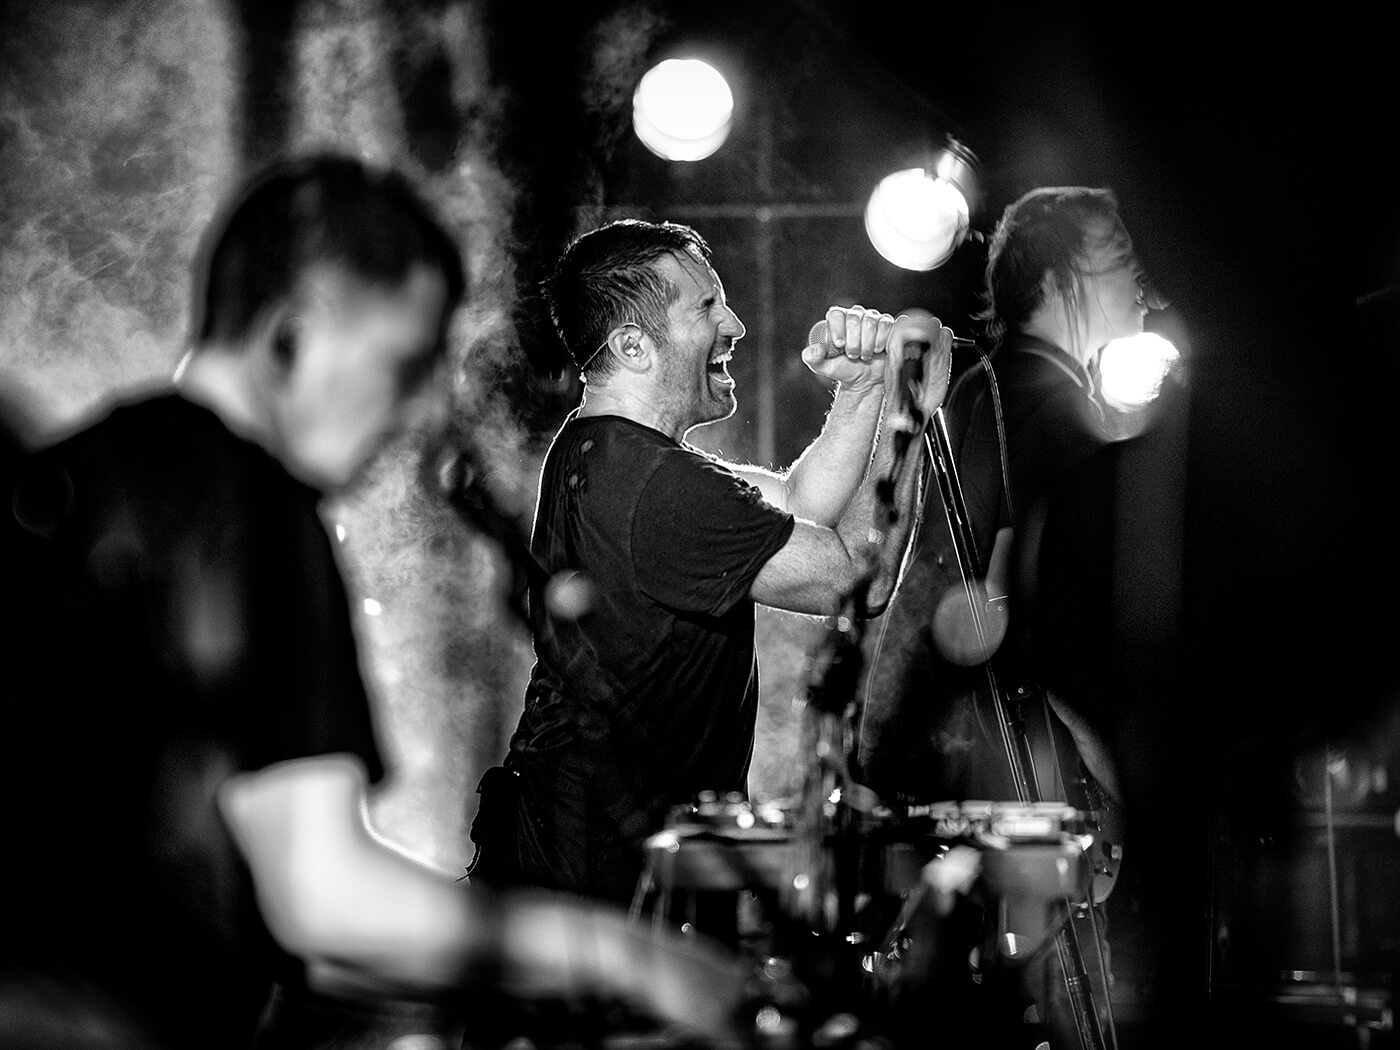 Trent Reznor, Atticus Ross and Robin Finck of Nine Inch Nails.